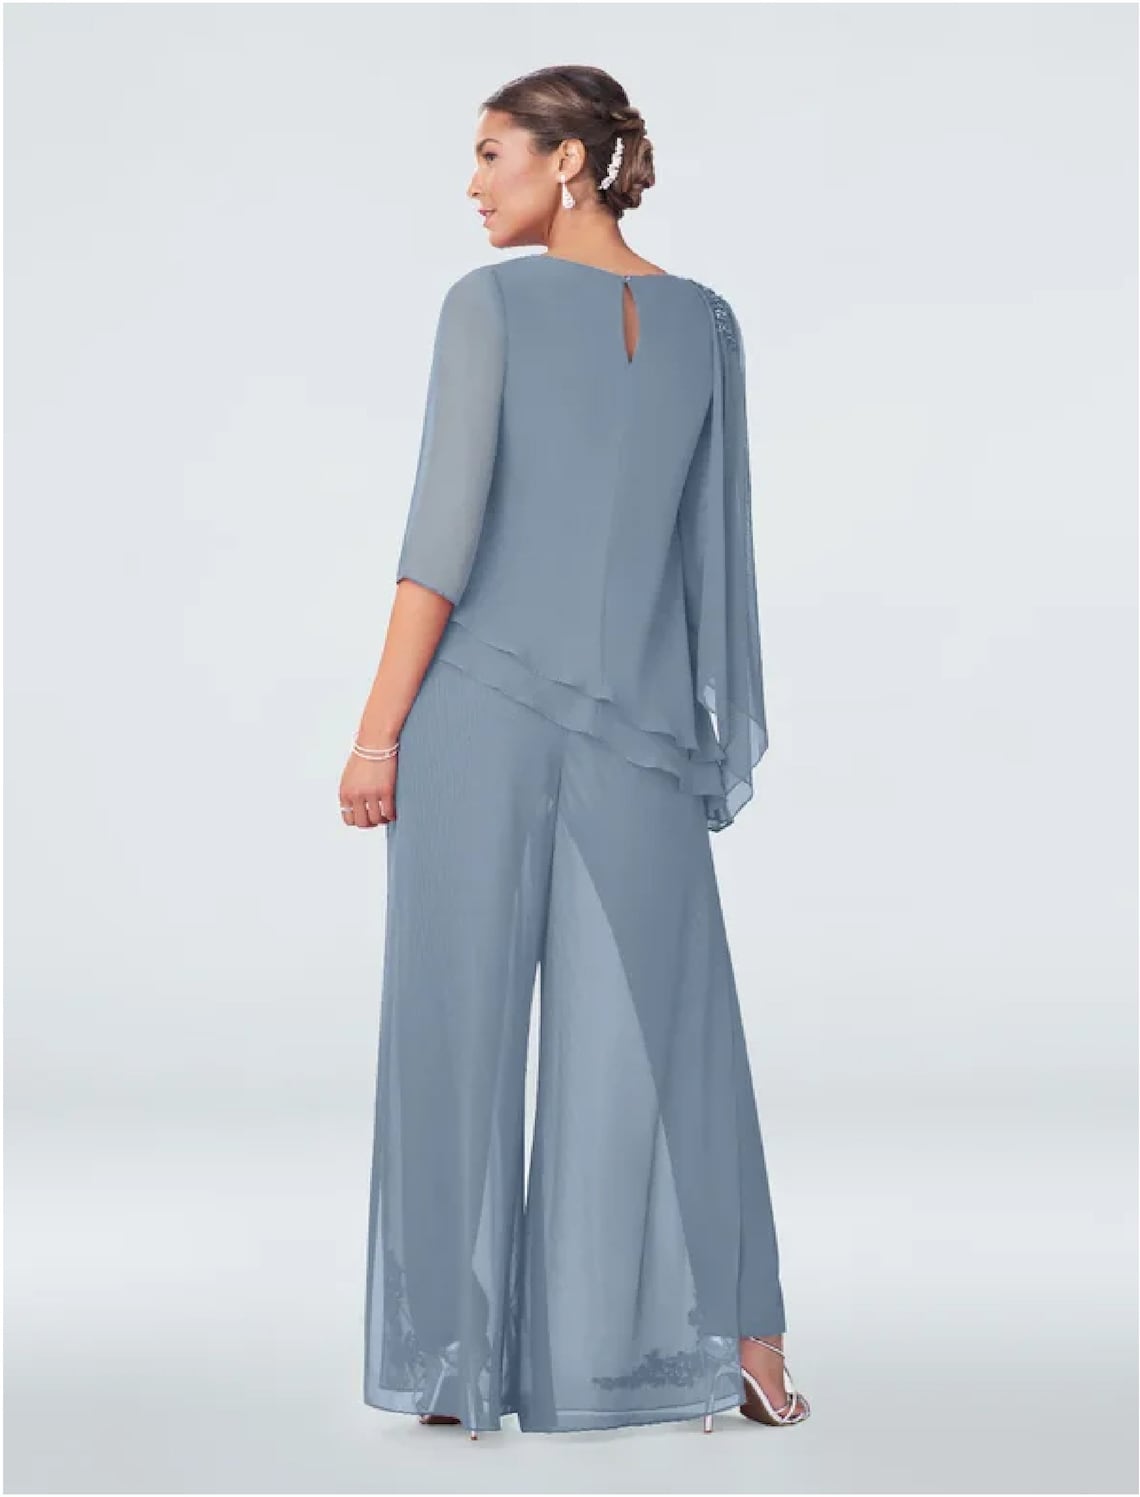 Dusty Blue 2 Piece Mother of the Bride/groom Pant Suit - Etsy